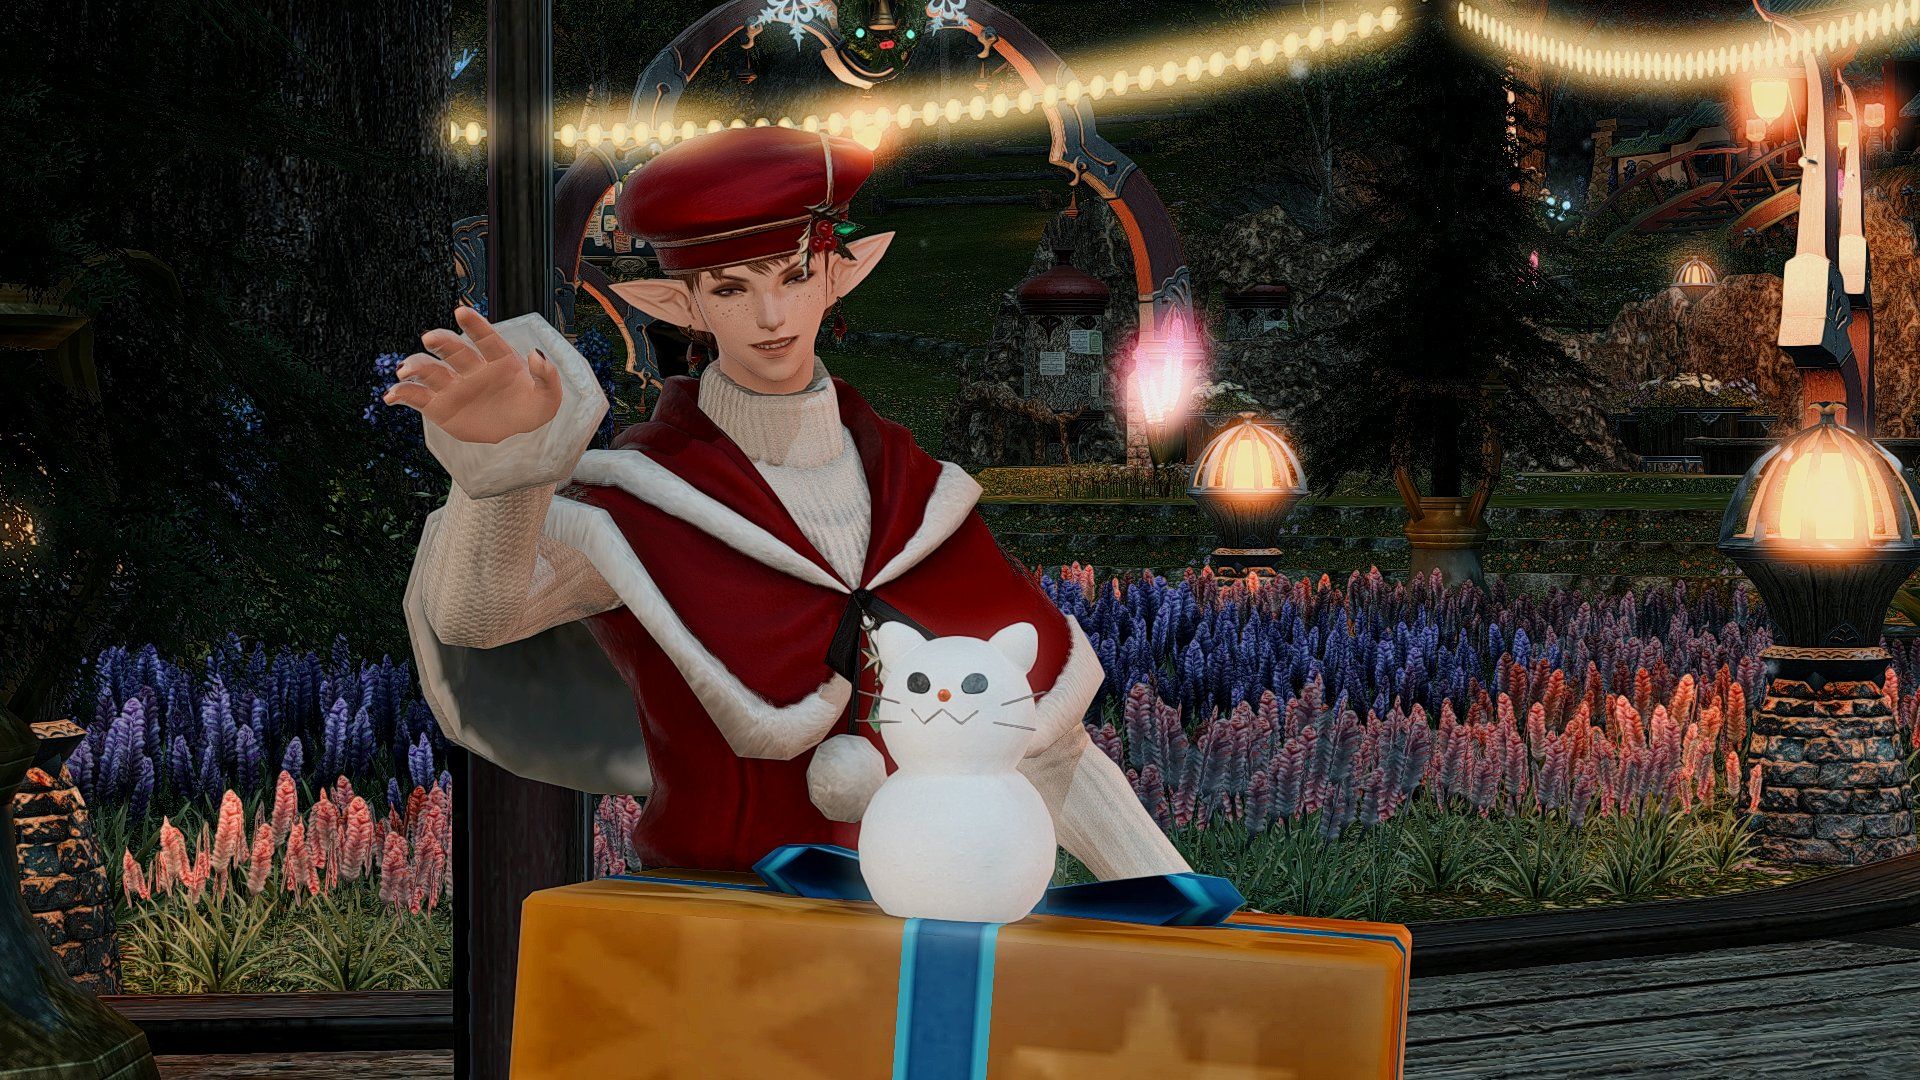 Final Fantasy 14 Ashara finding the cat snowman in game